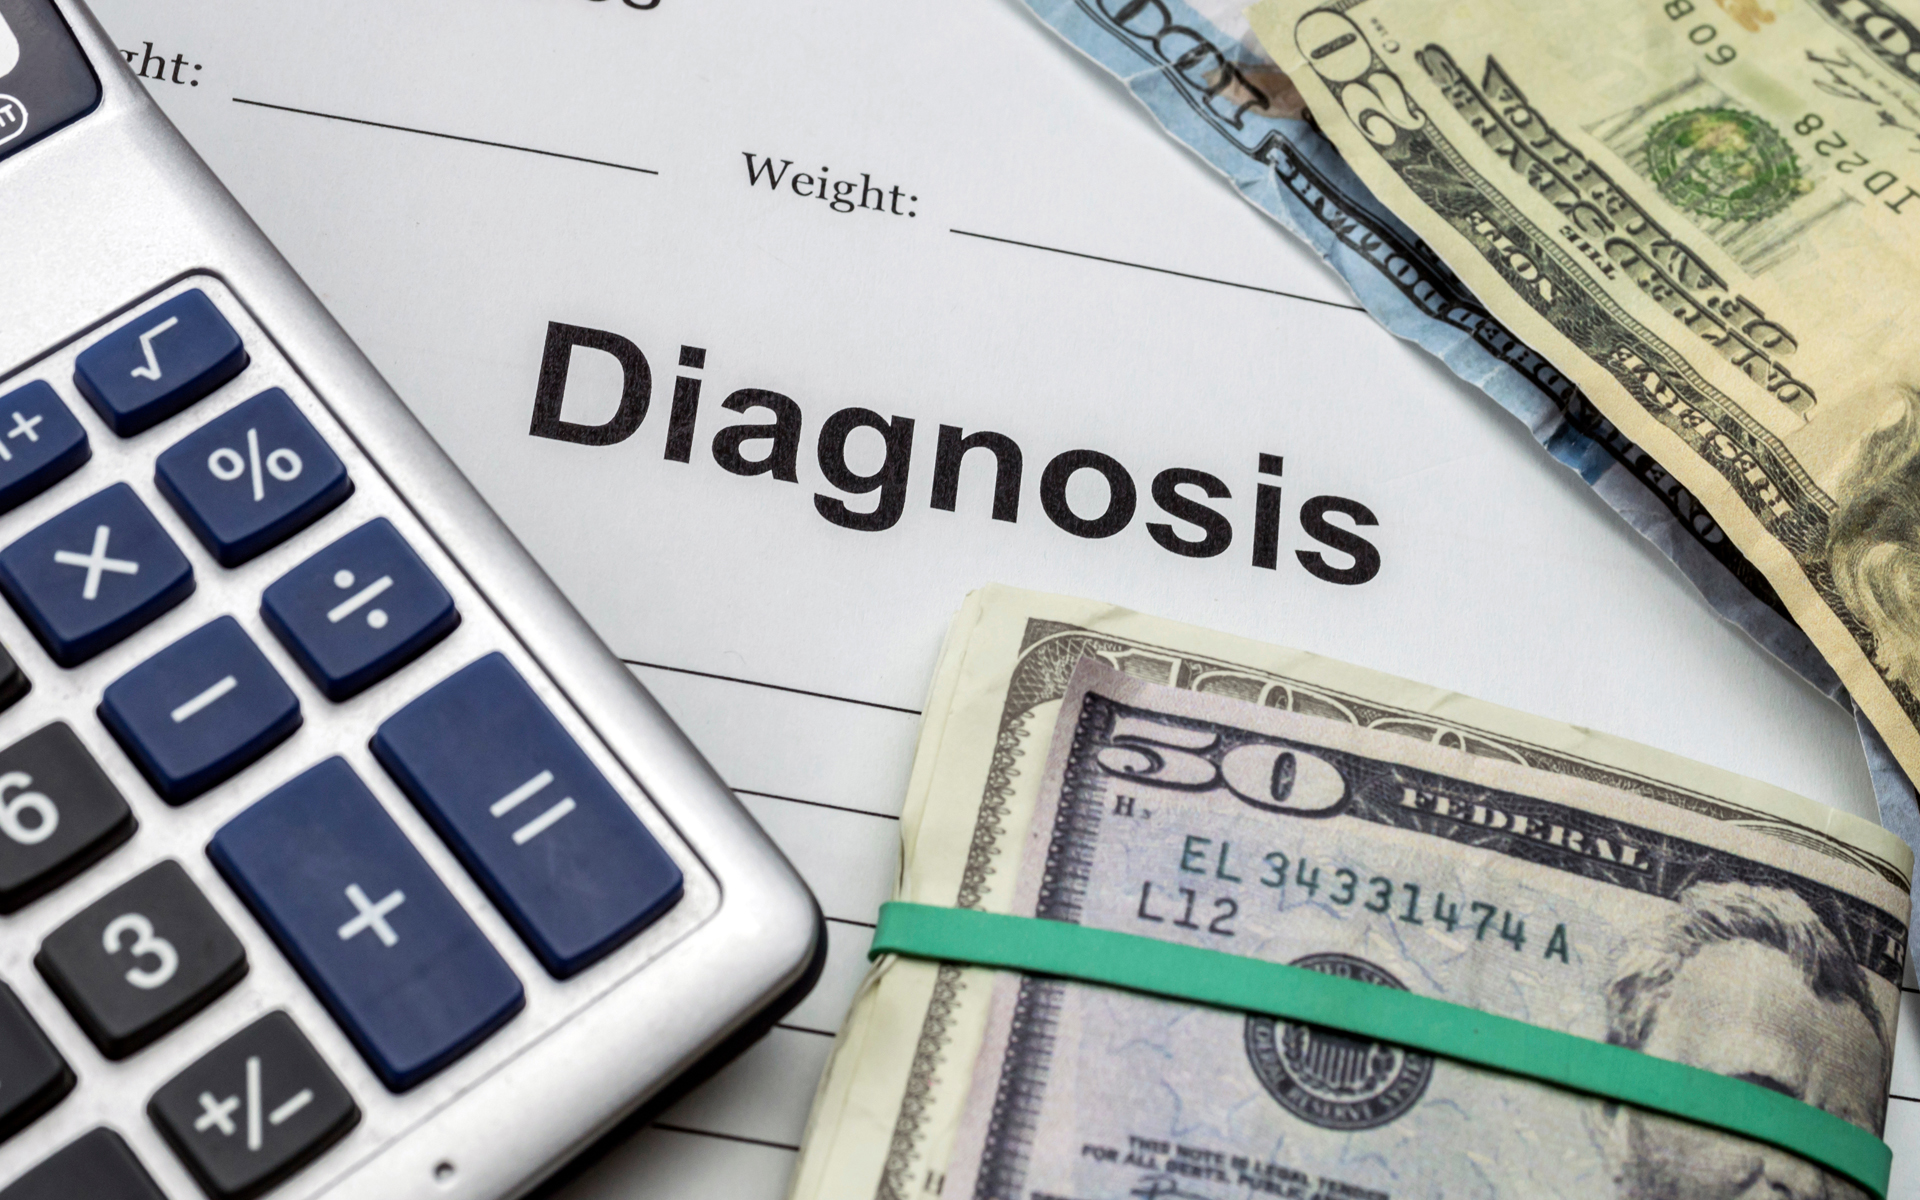 Image for Millions of Long Covid Patients Have to Pay an Average of 9000 A Year. A decorative image of diagnosis paperwork with a calculator and some loose money.,